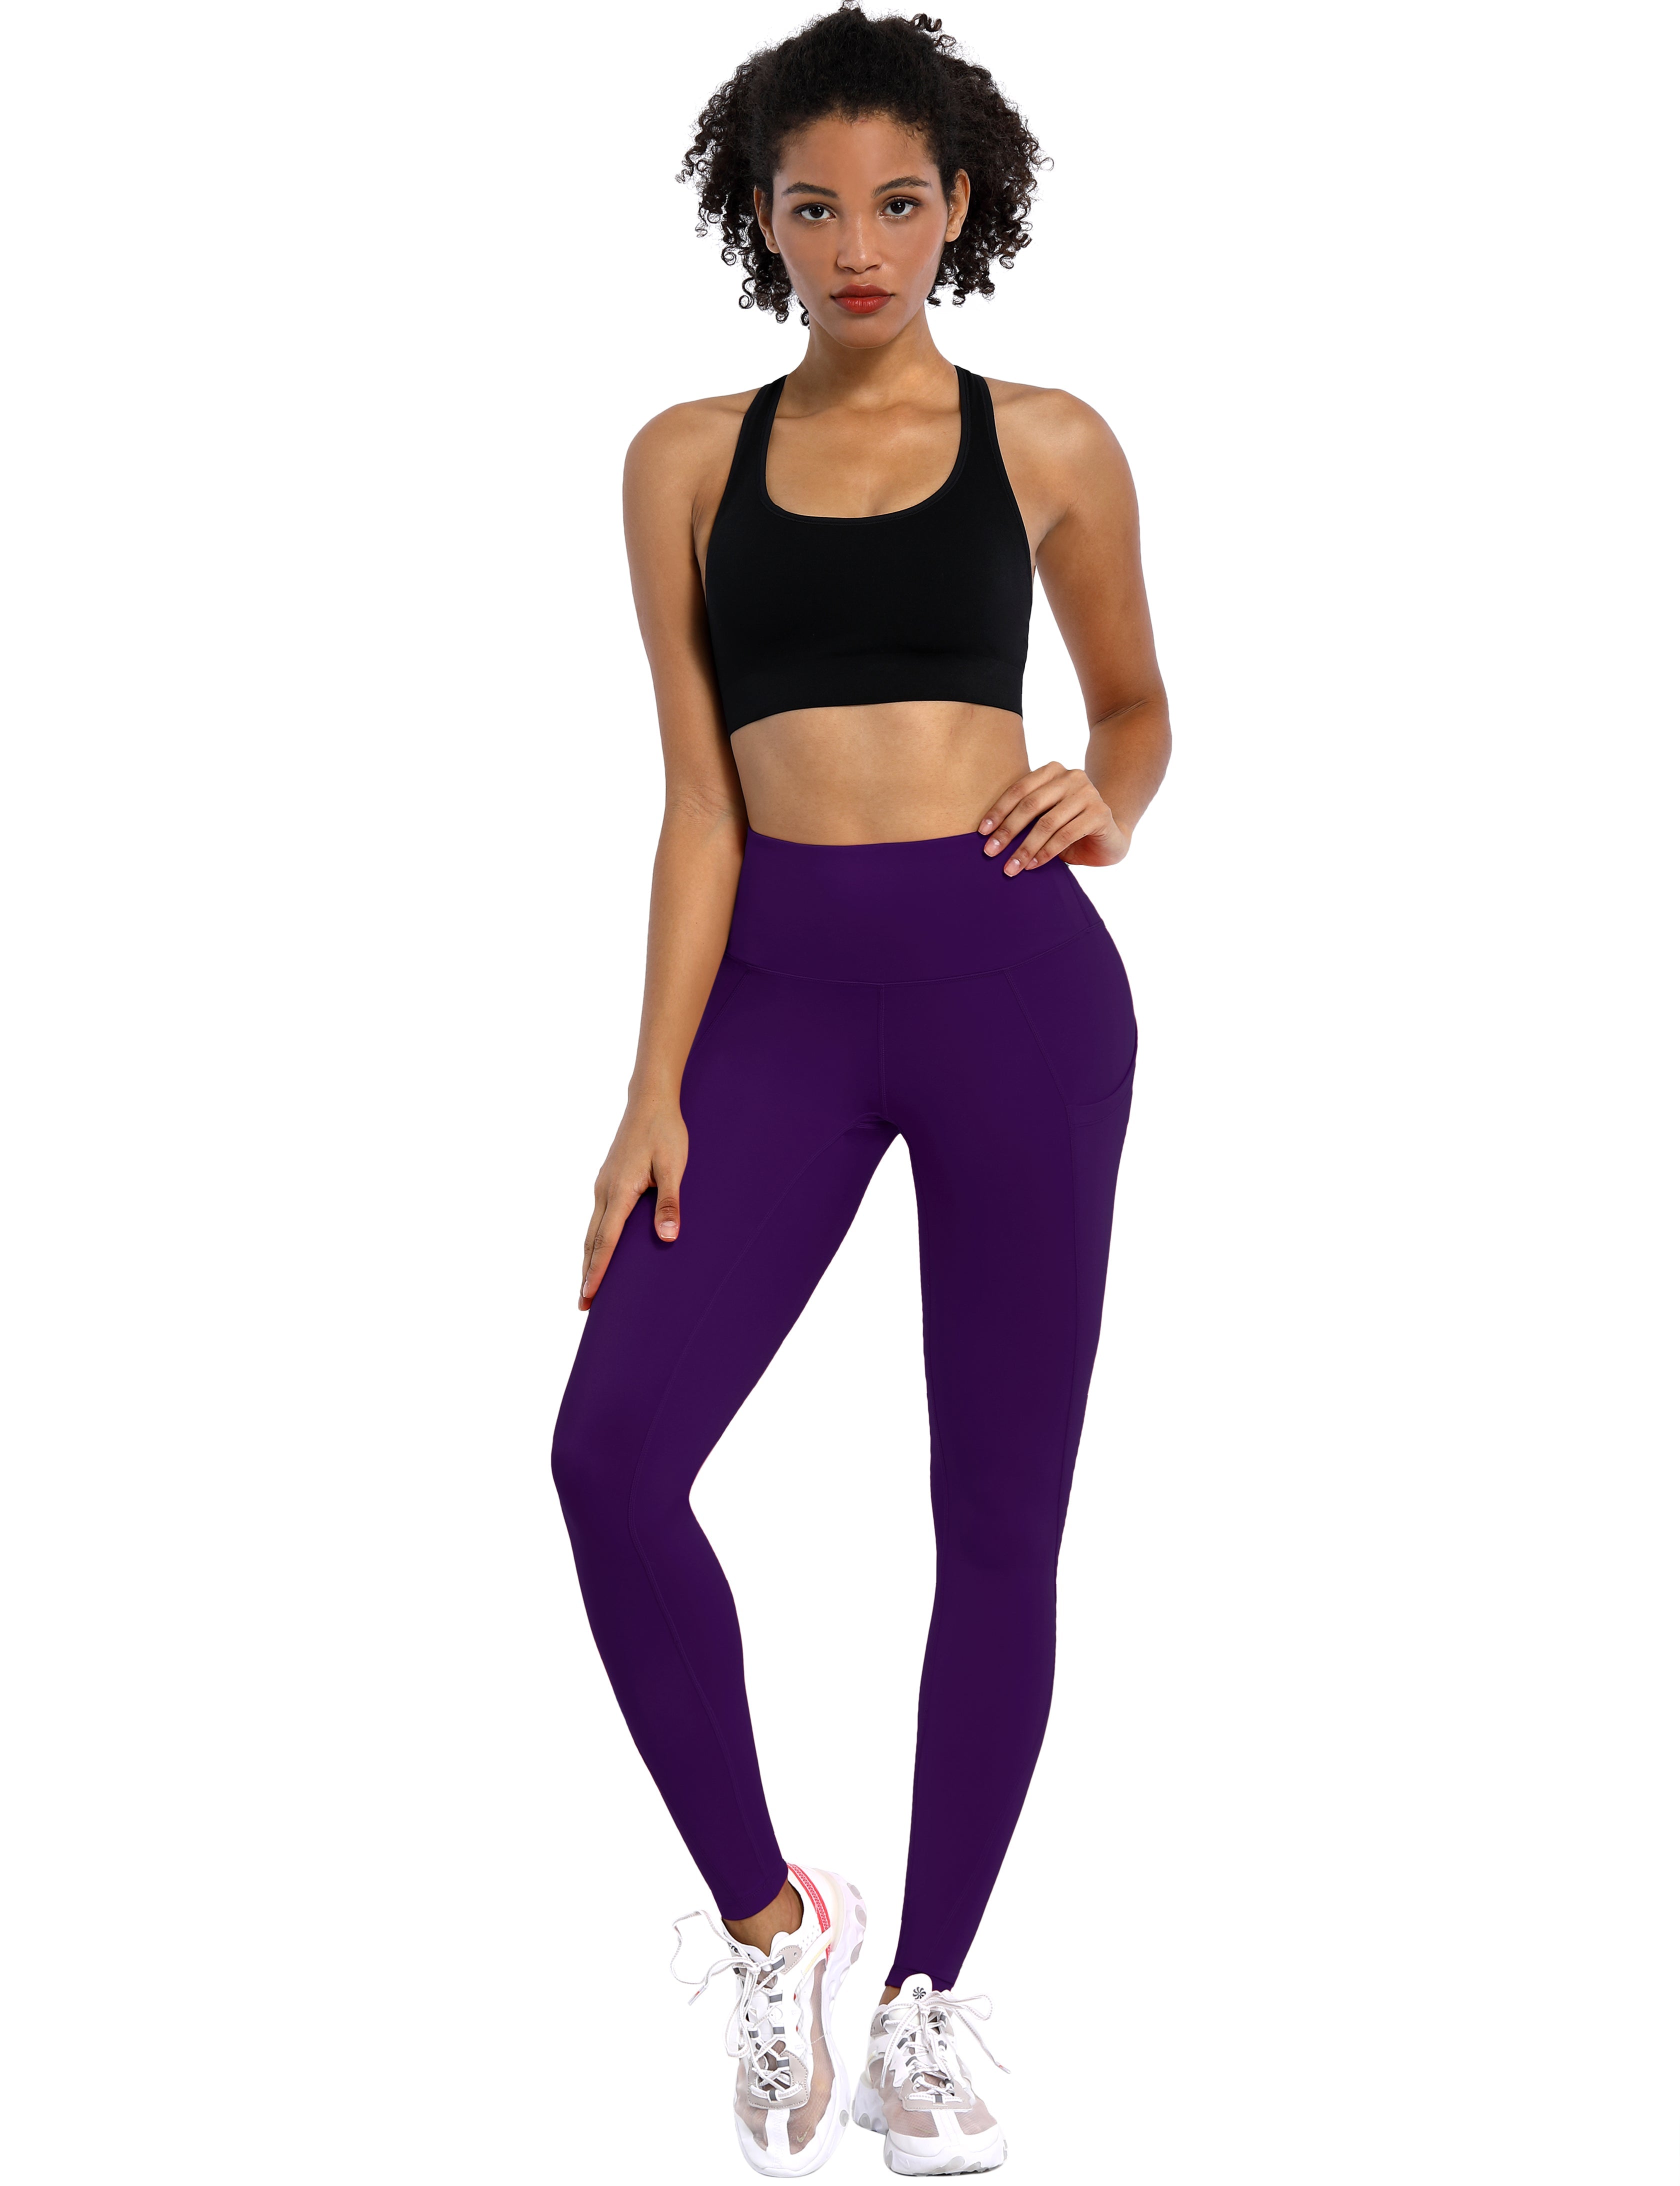 High Waist Side Pockets Pilates Pants pansypurple 75% Nylon, 25% Spandex Fabric doesn't attract lint easily 4-way stretch No see-through Moisture-wicking Tummy control Inner pocket